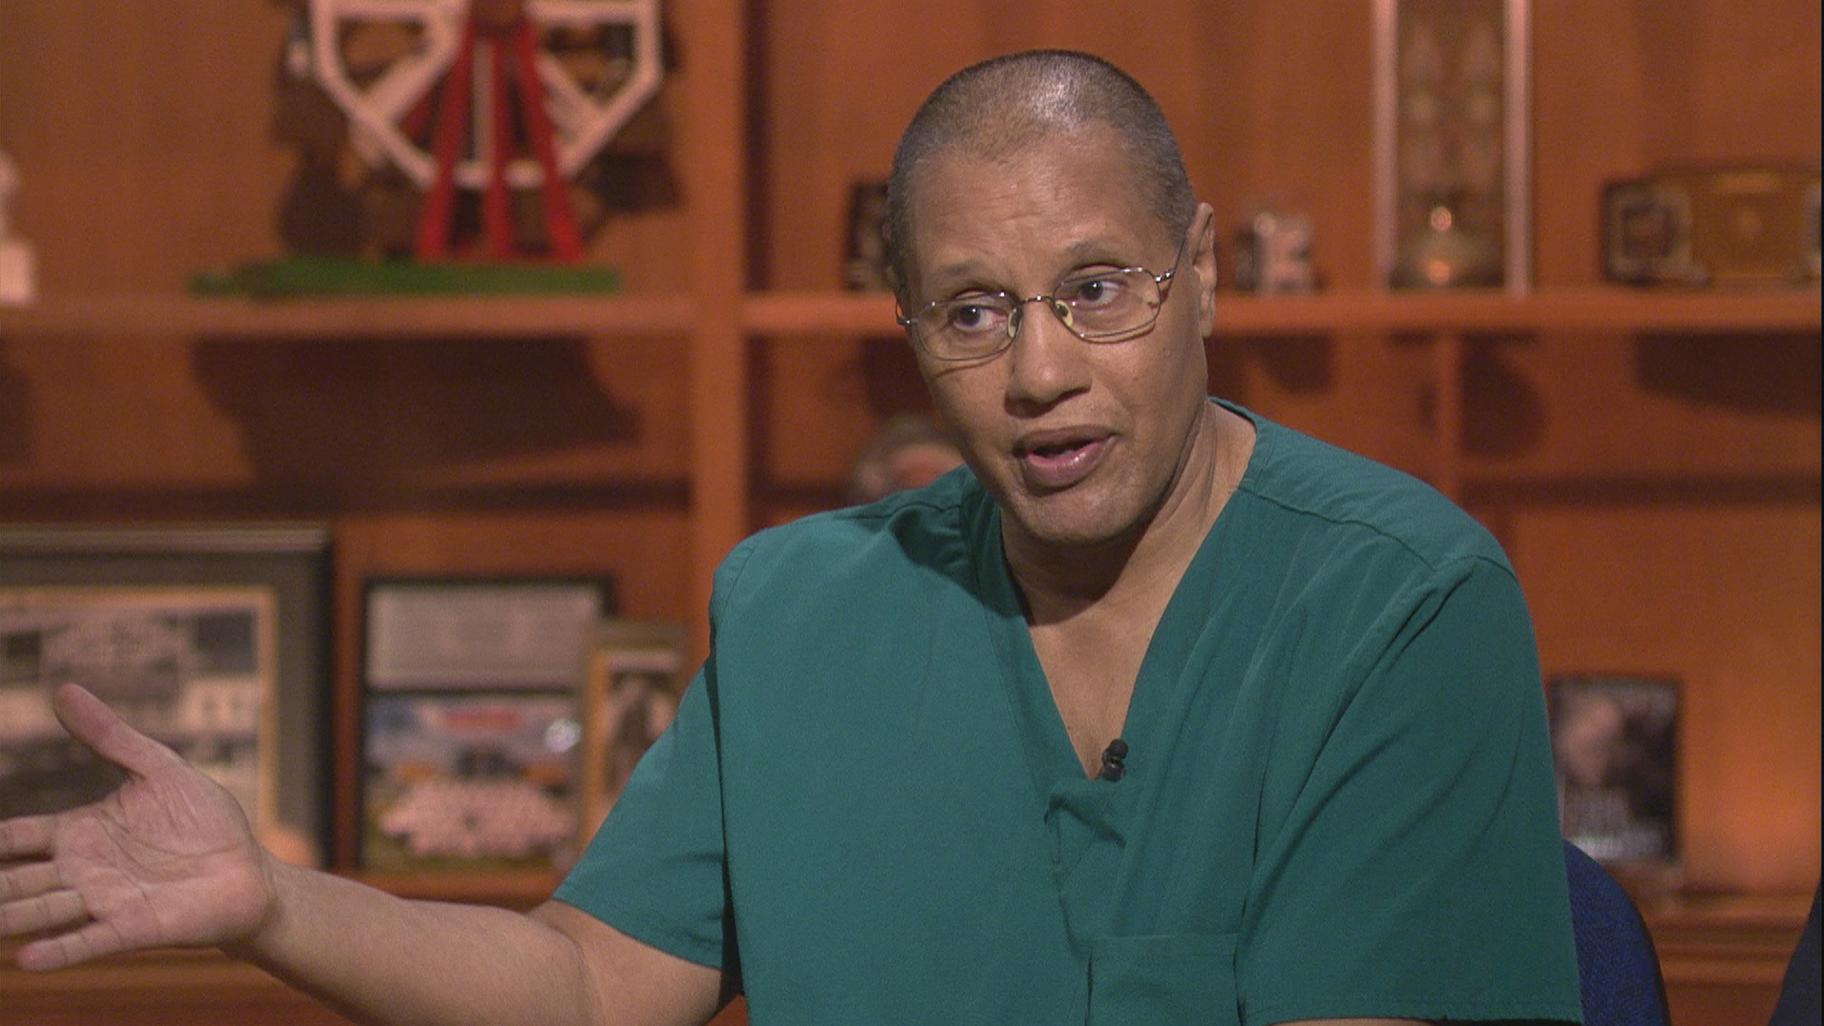 Dr. Carl Bell appears on “Chicago Tonight” on July 17, 2019.